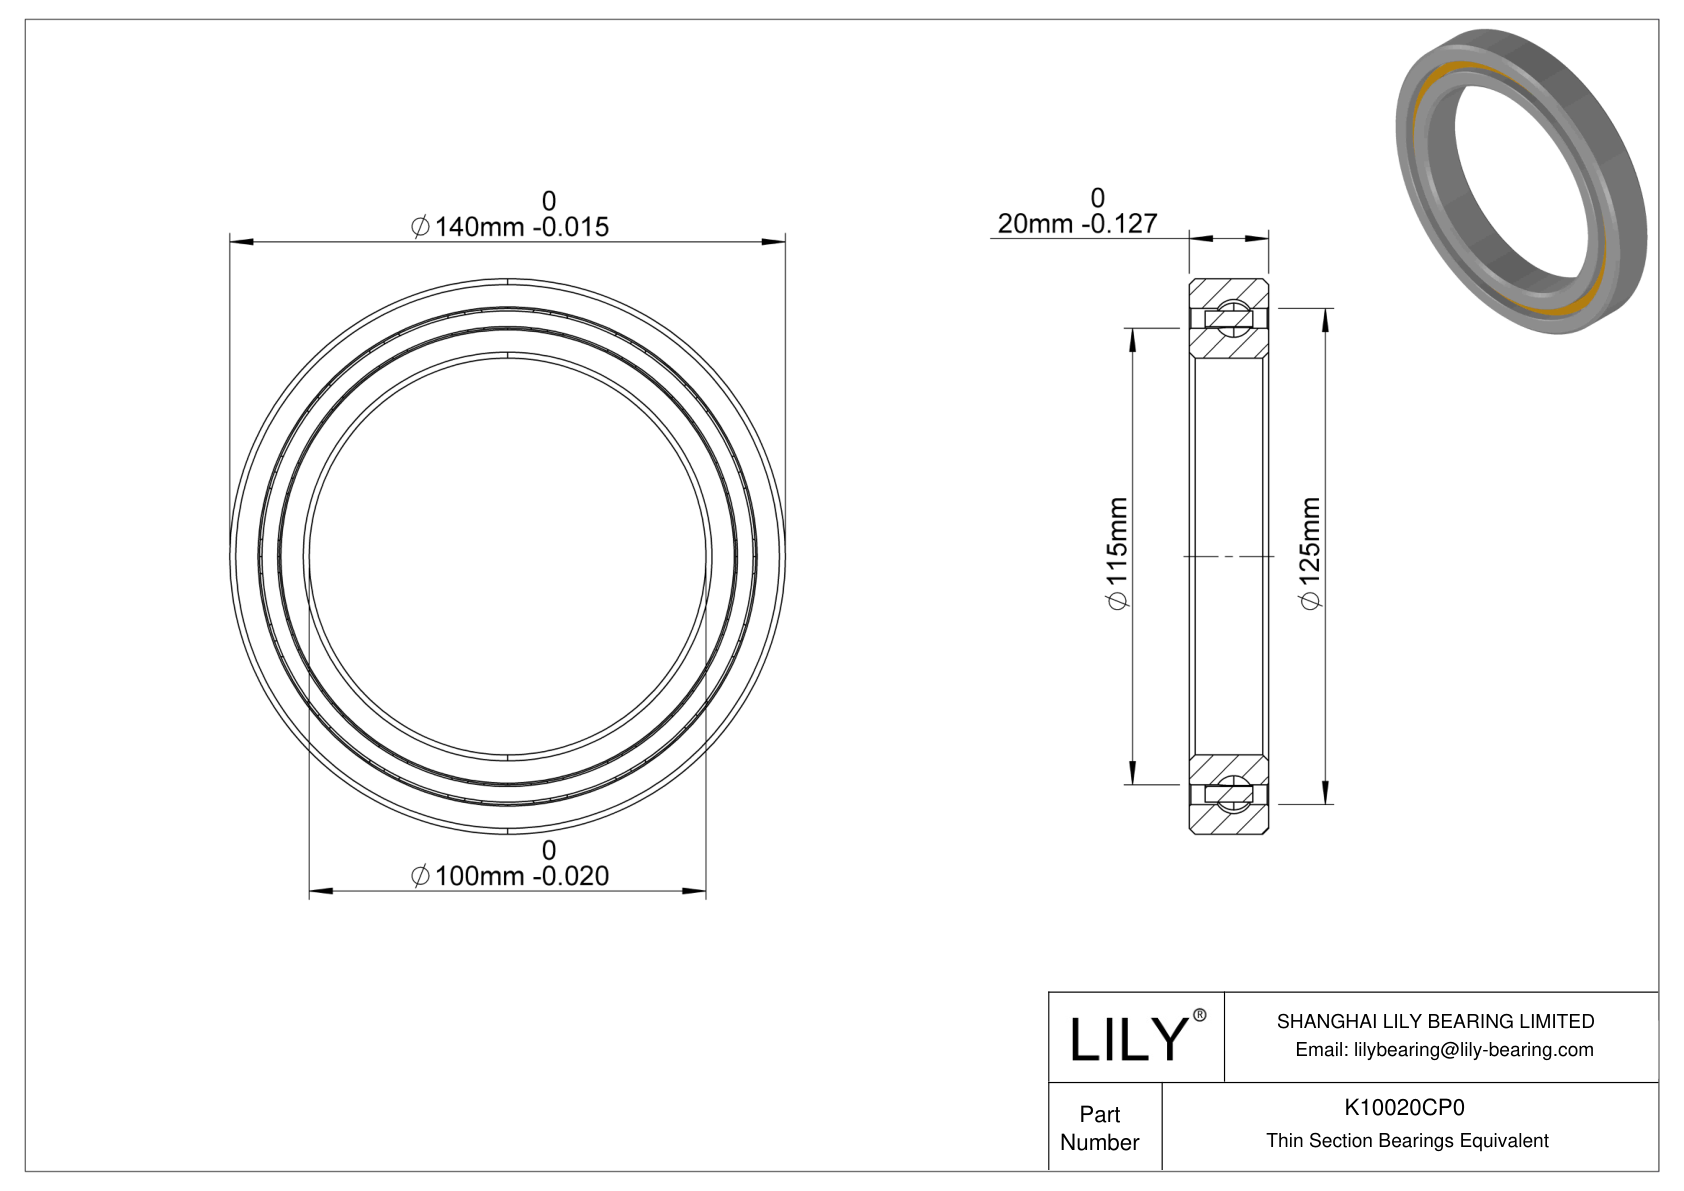 K10020CP0 Constant Section (CS) Bearings cad drawing